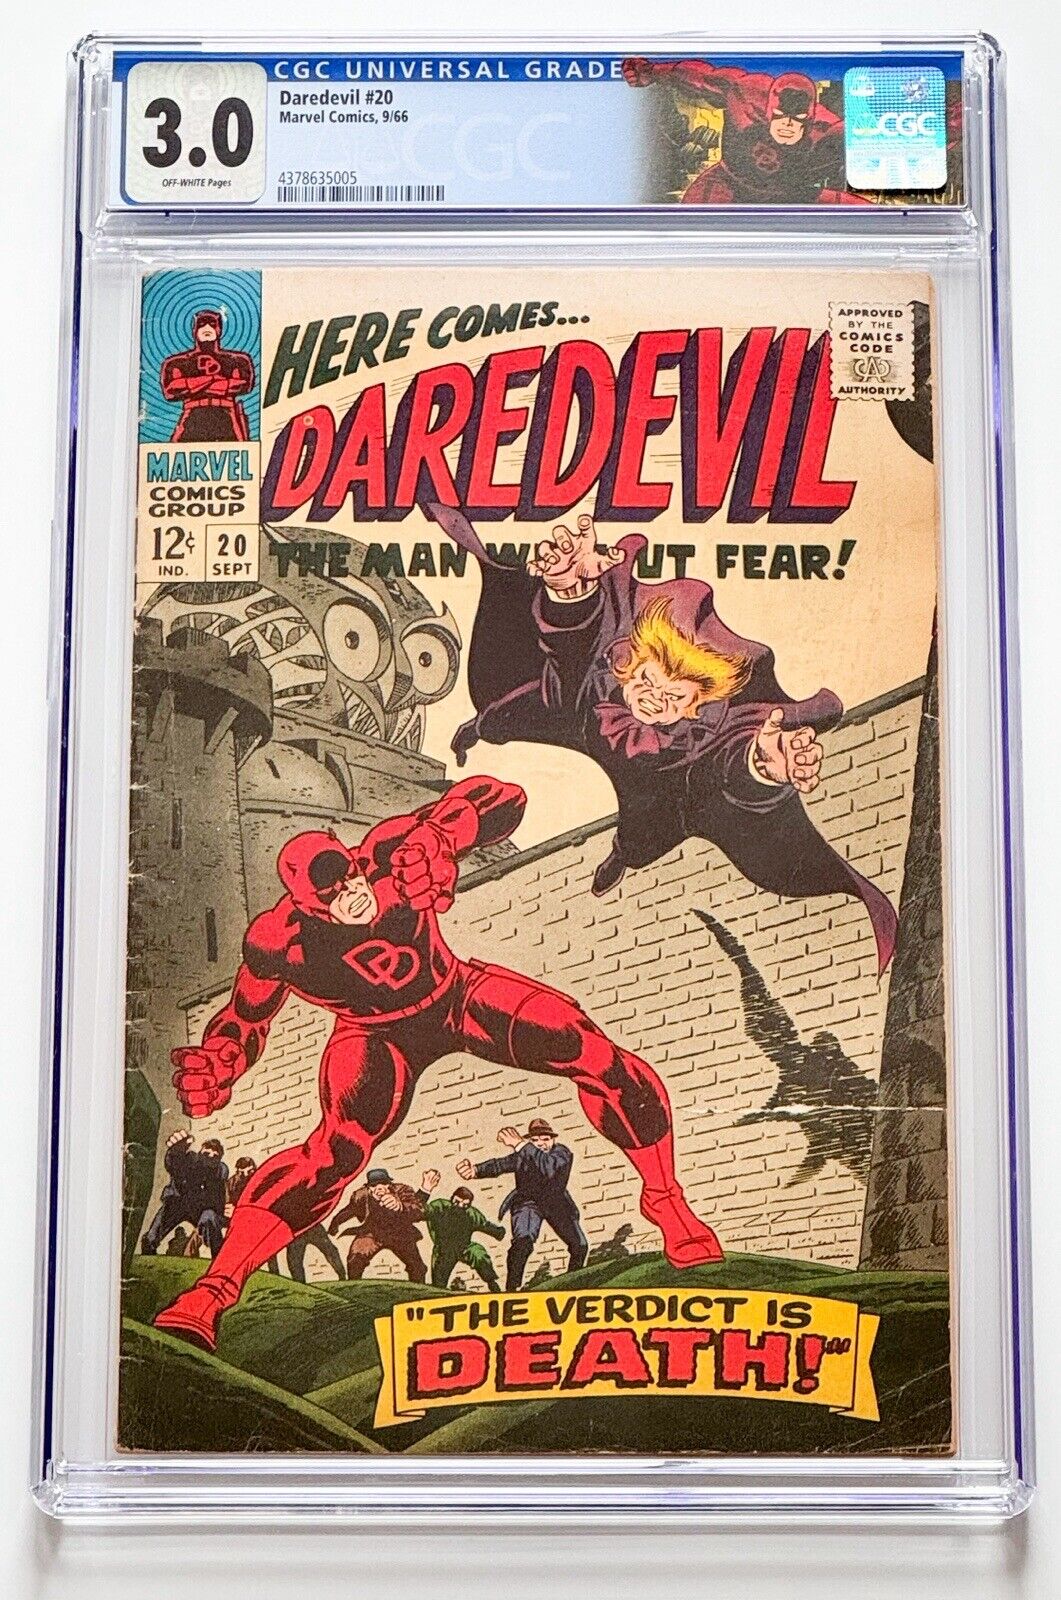 DAREDEVIL #20 CGC 3.0 OFF-WHITE PAGES ICONIC JOHN ROMITA COVER MARVEL 1966